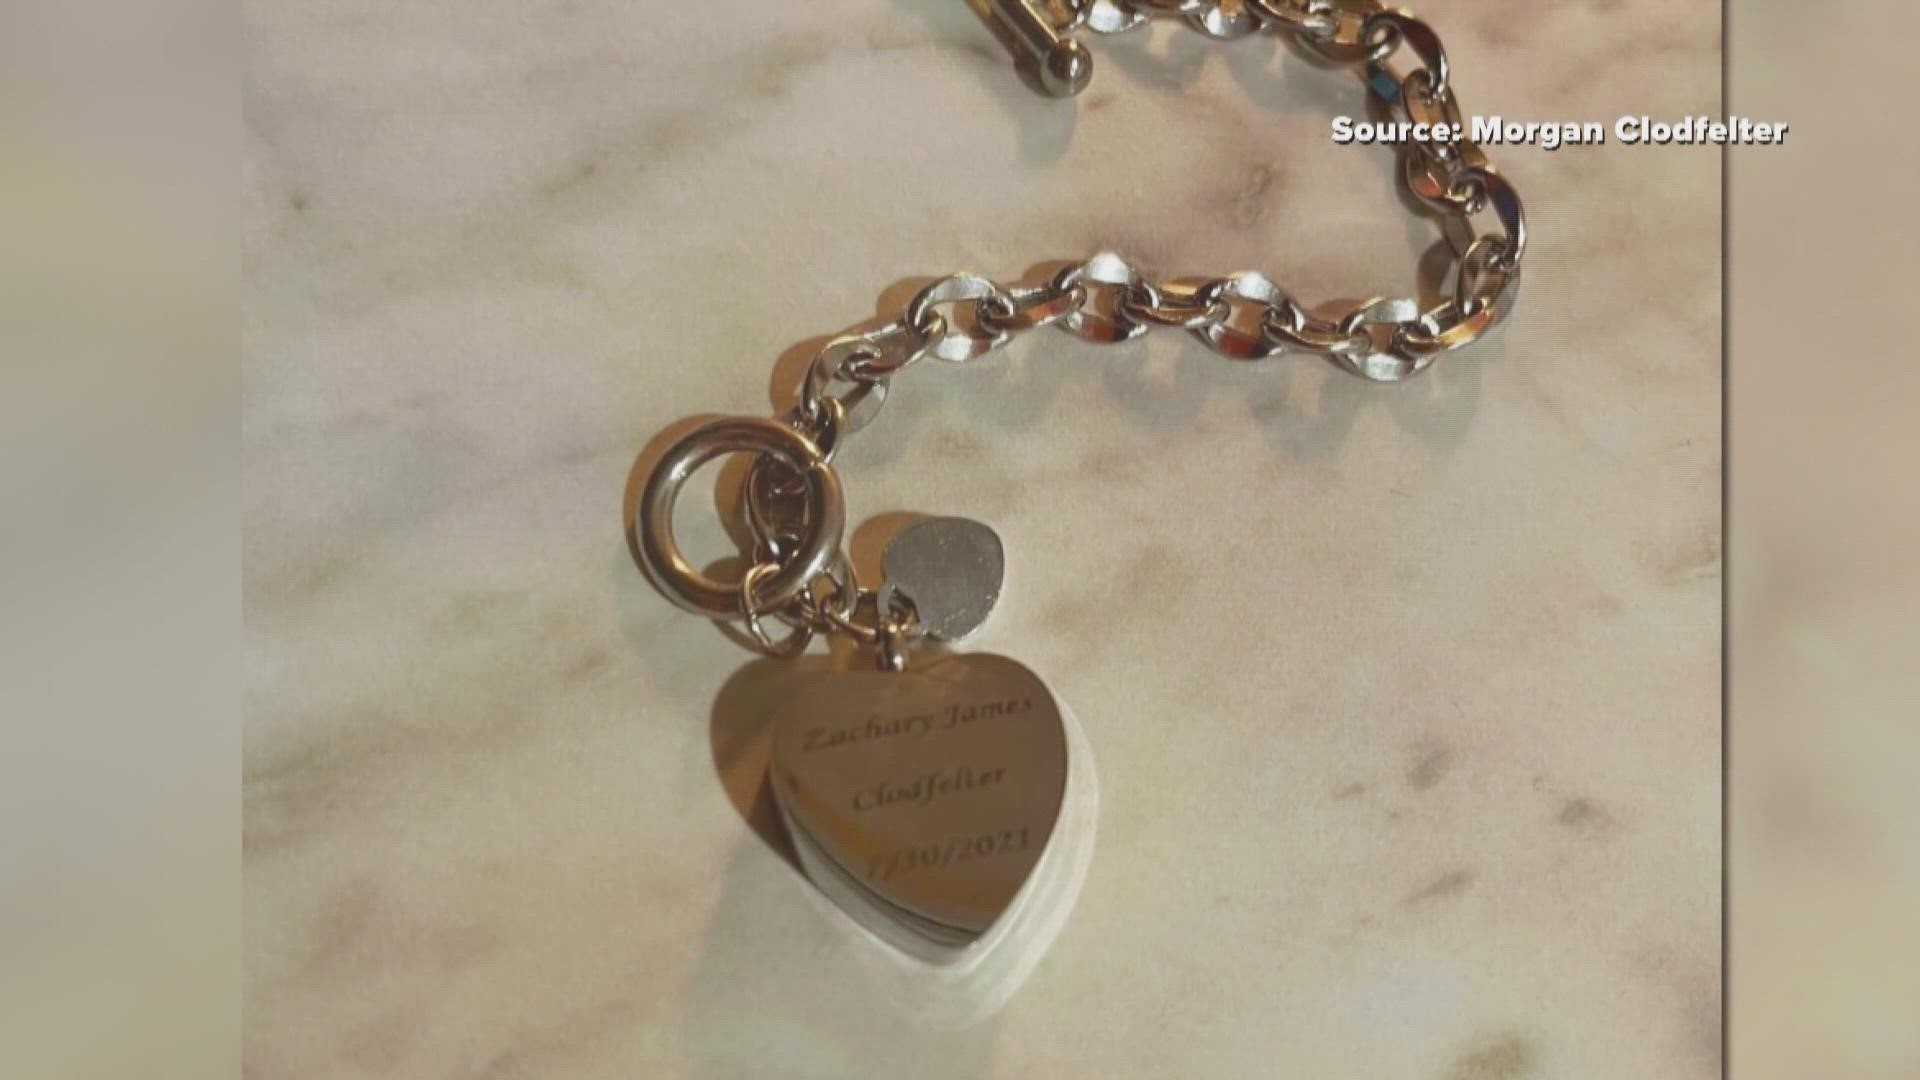 A mother's heart is at ease after finding her bracelet with her son's ashes inside. After retracing her steps, she found the bracelet in the car seat.